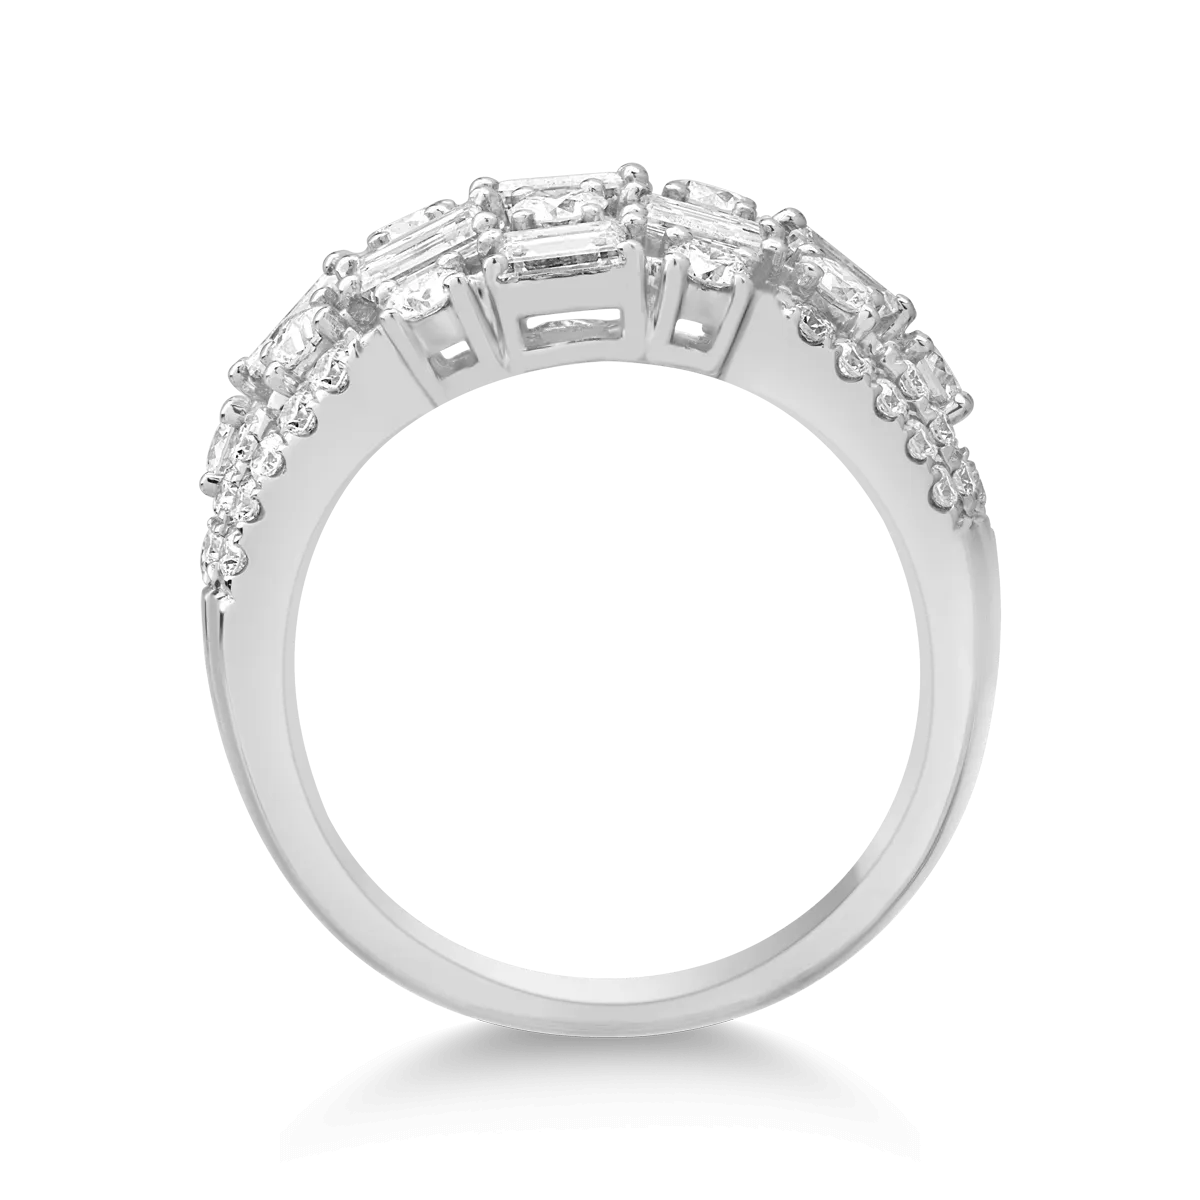 18K white gold ring with 2.74ct diamonds